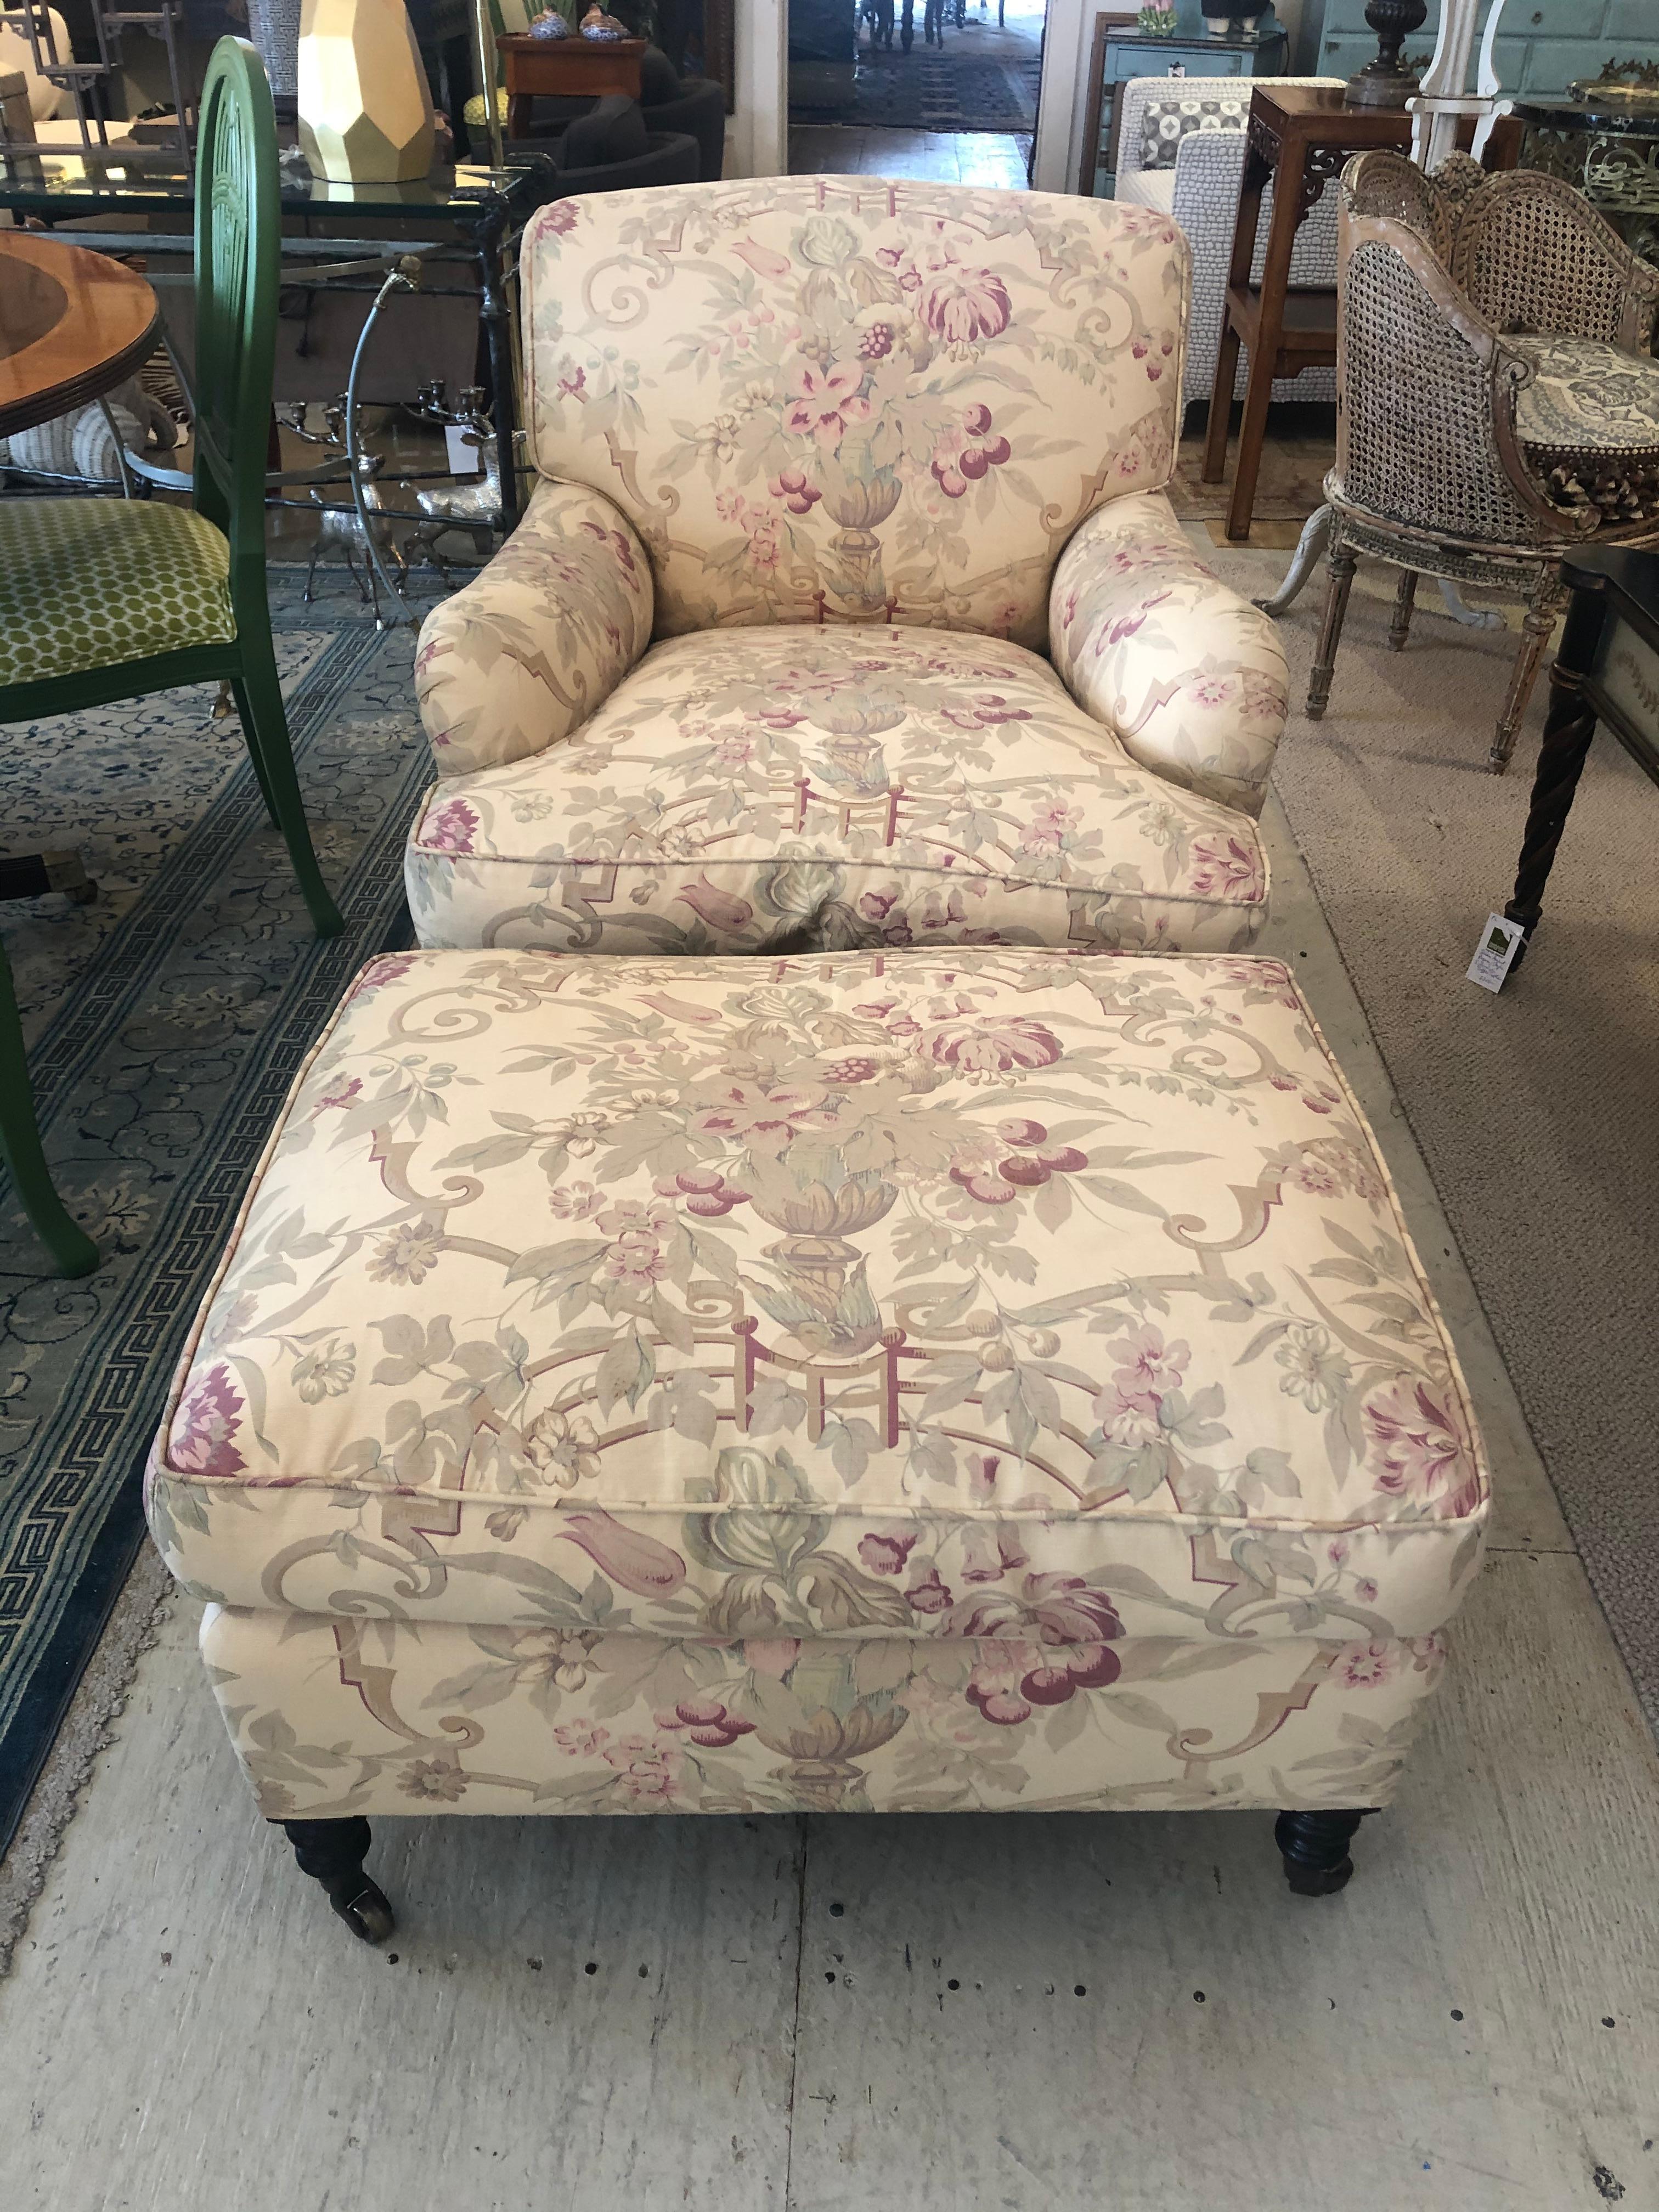 A classic George Smith large Signature Standard club chair with matching ottoman upholstered in their famous romantic faded Gollut fabric #5. Down filled seat and ottoman cushions. Fixed back cushion and coordinating throw pillow. 
No label, but